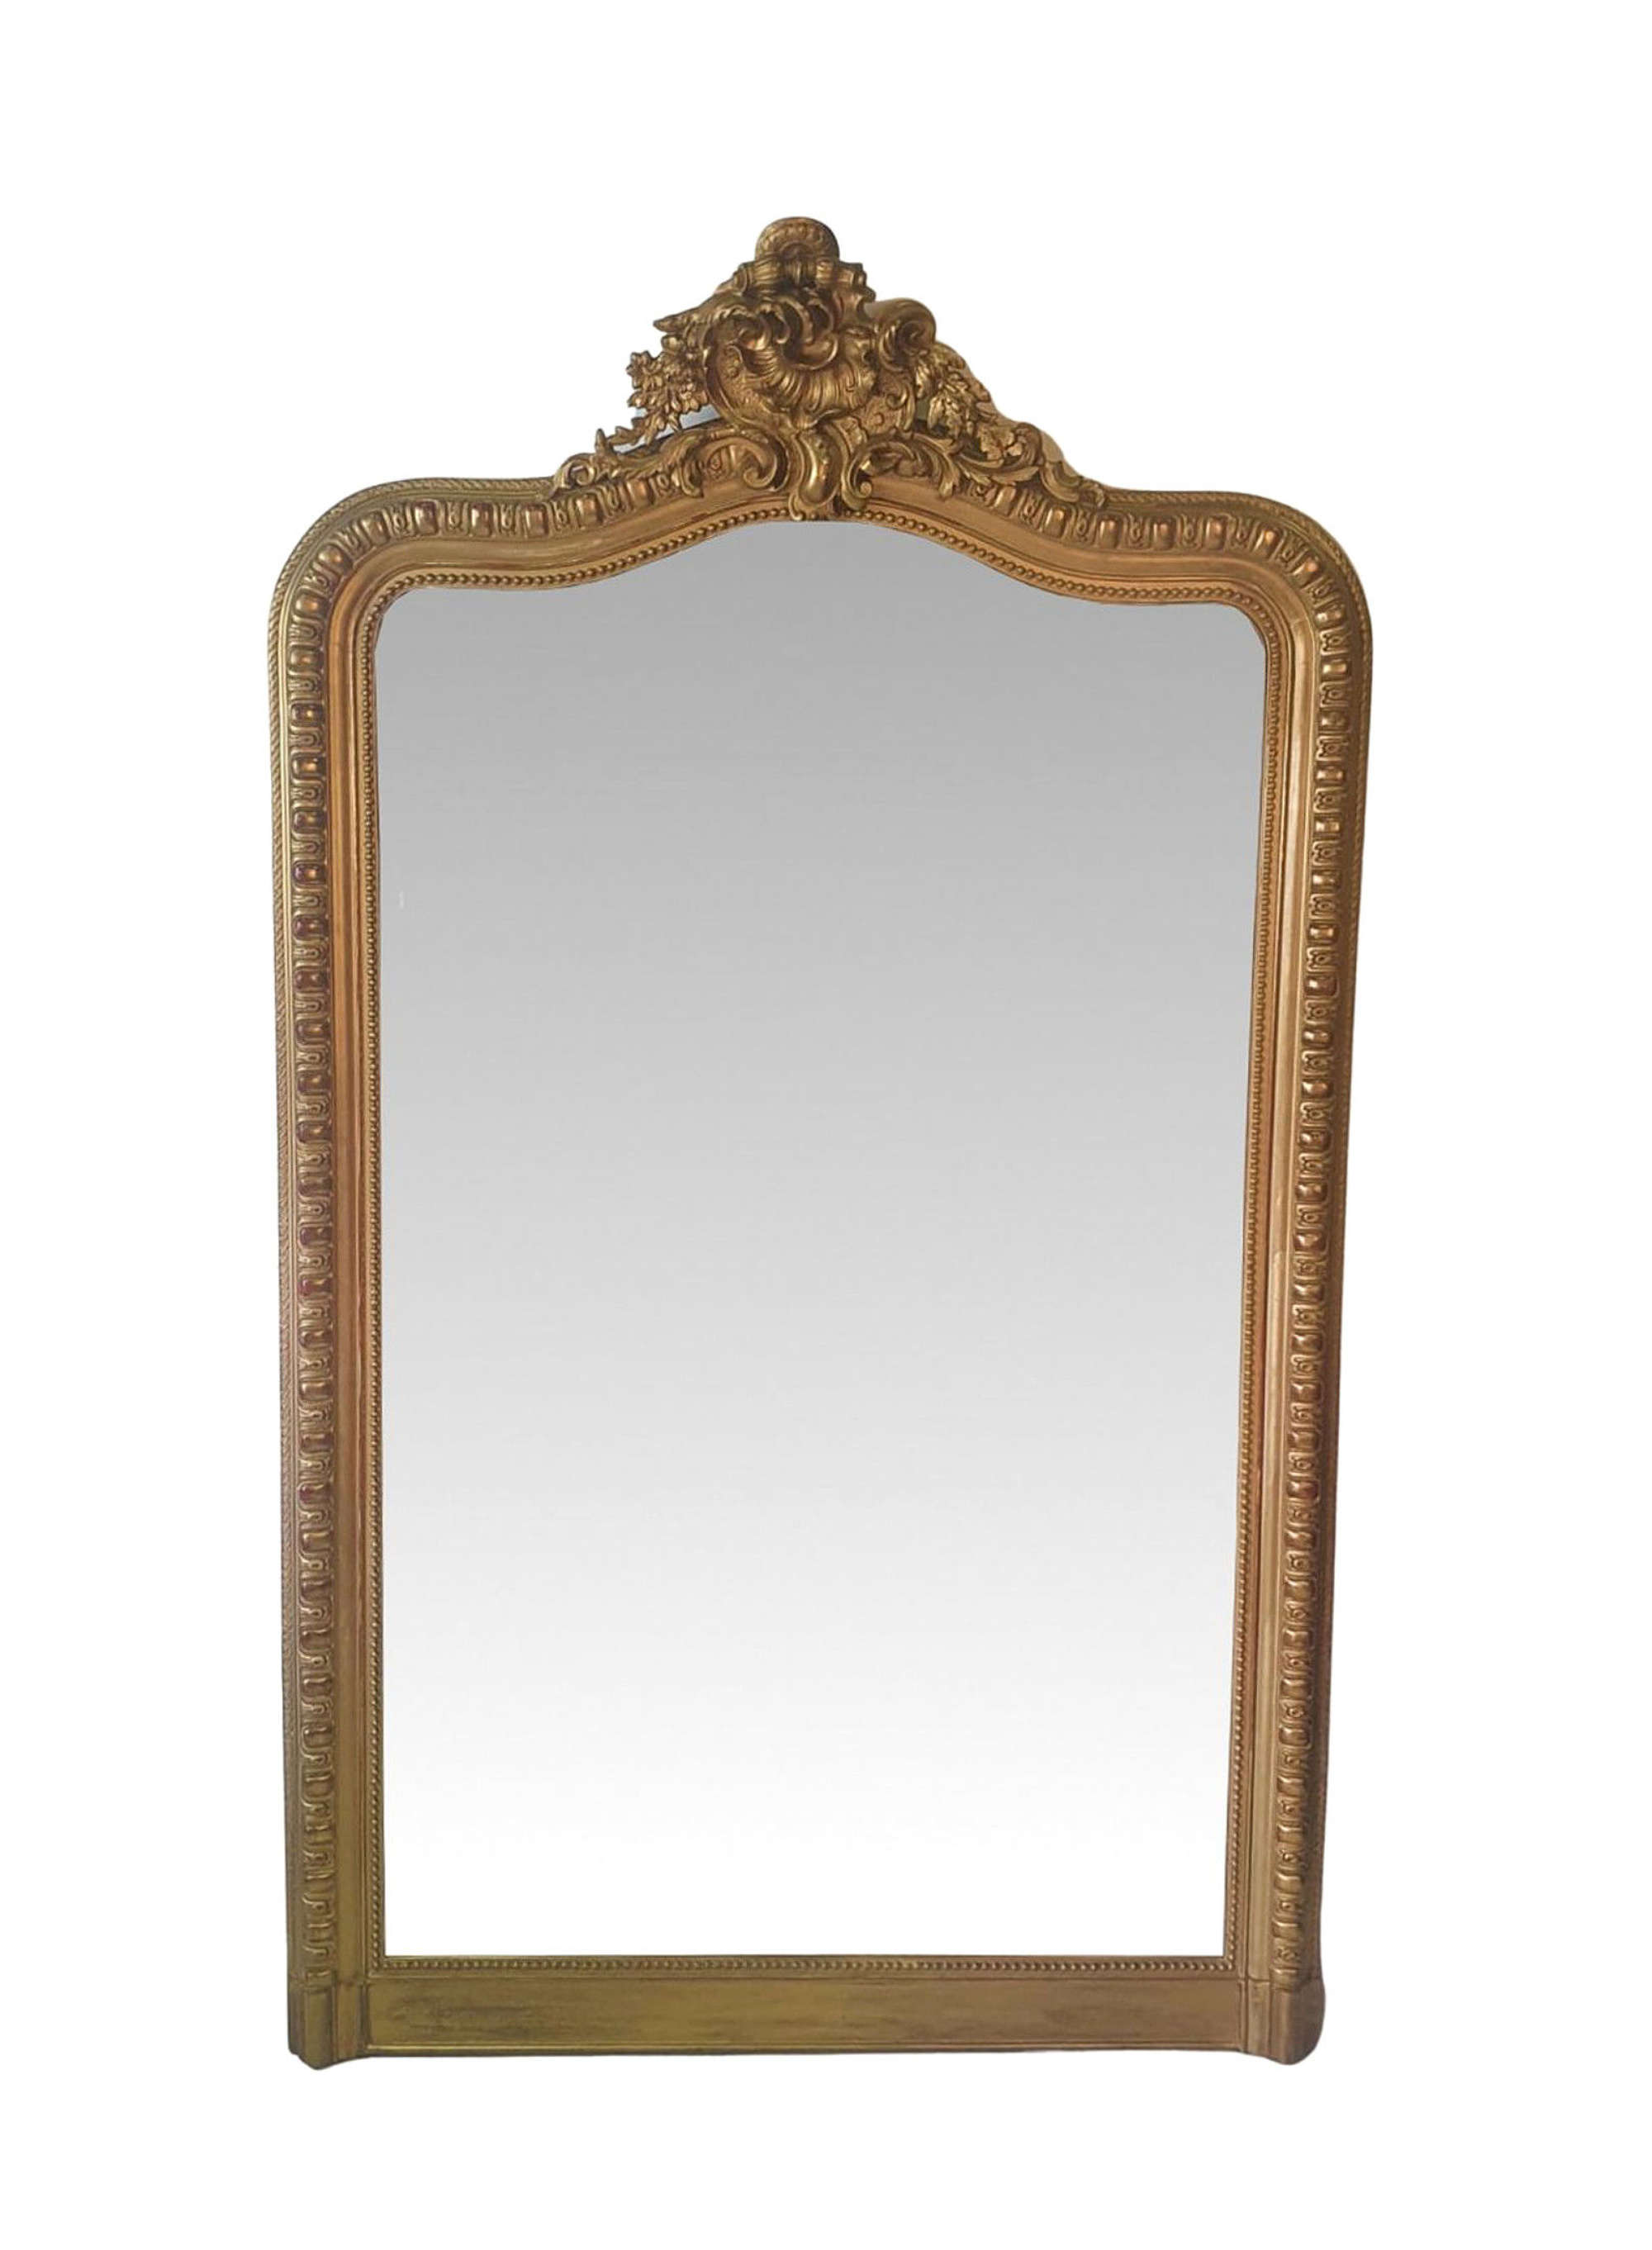 A Fabulous 19th Century Large Gilt Wood Leaner Or Dressing Antique Mirror